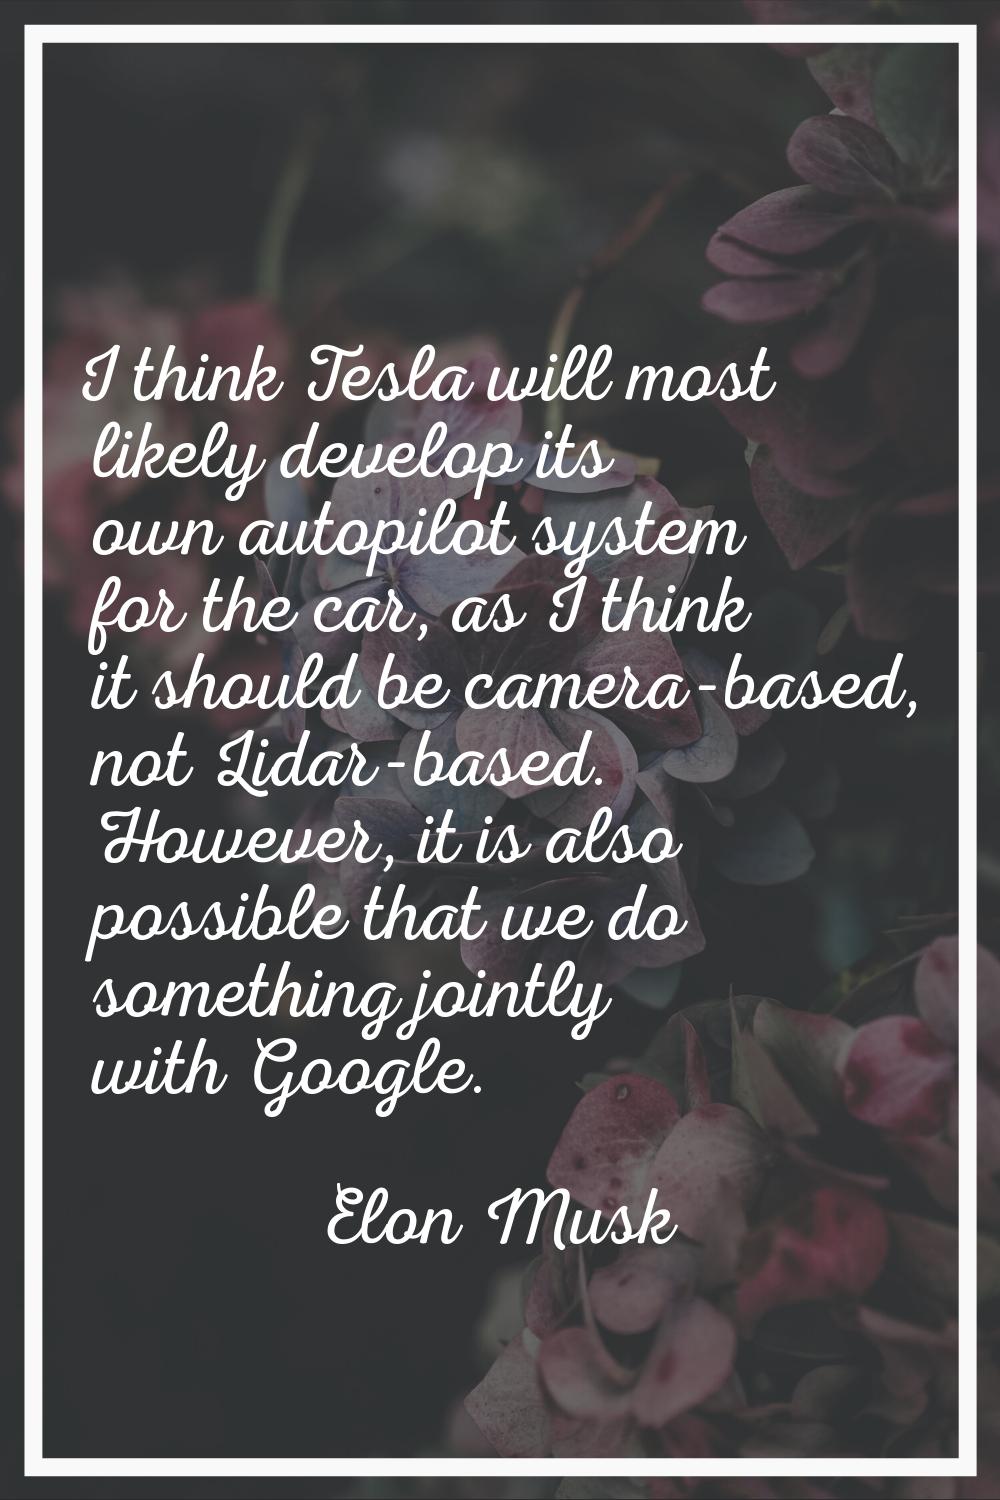 I think Tesla will most likely develop its own autopilot system for the car, as I think it should b